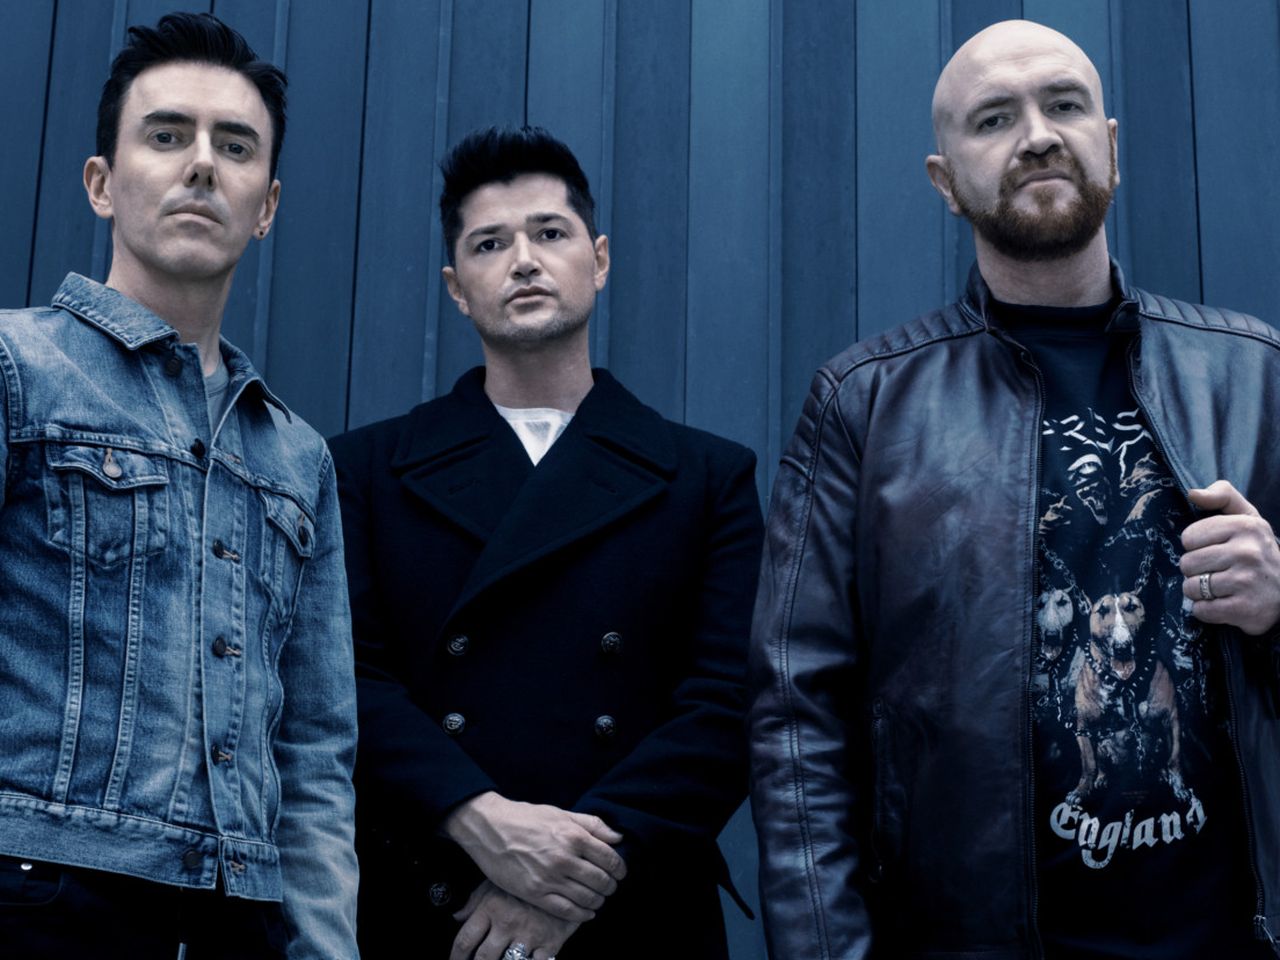 The Script released their first album in 2008, which quickly became a commercial success, reaching the top of the charts in several countries.